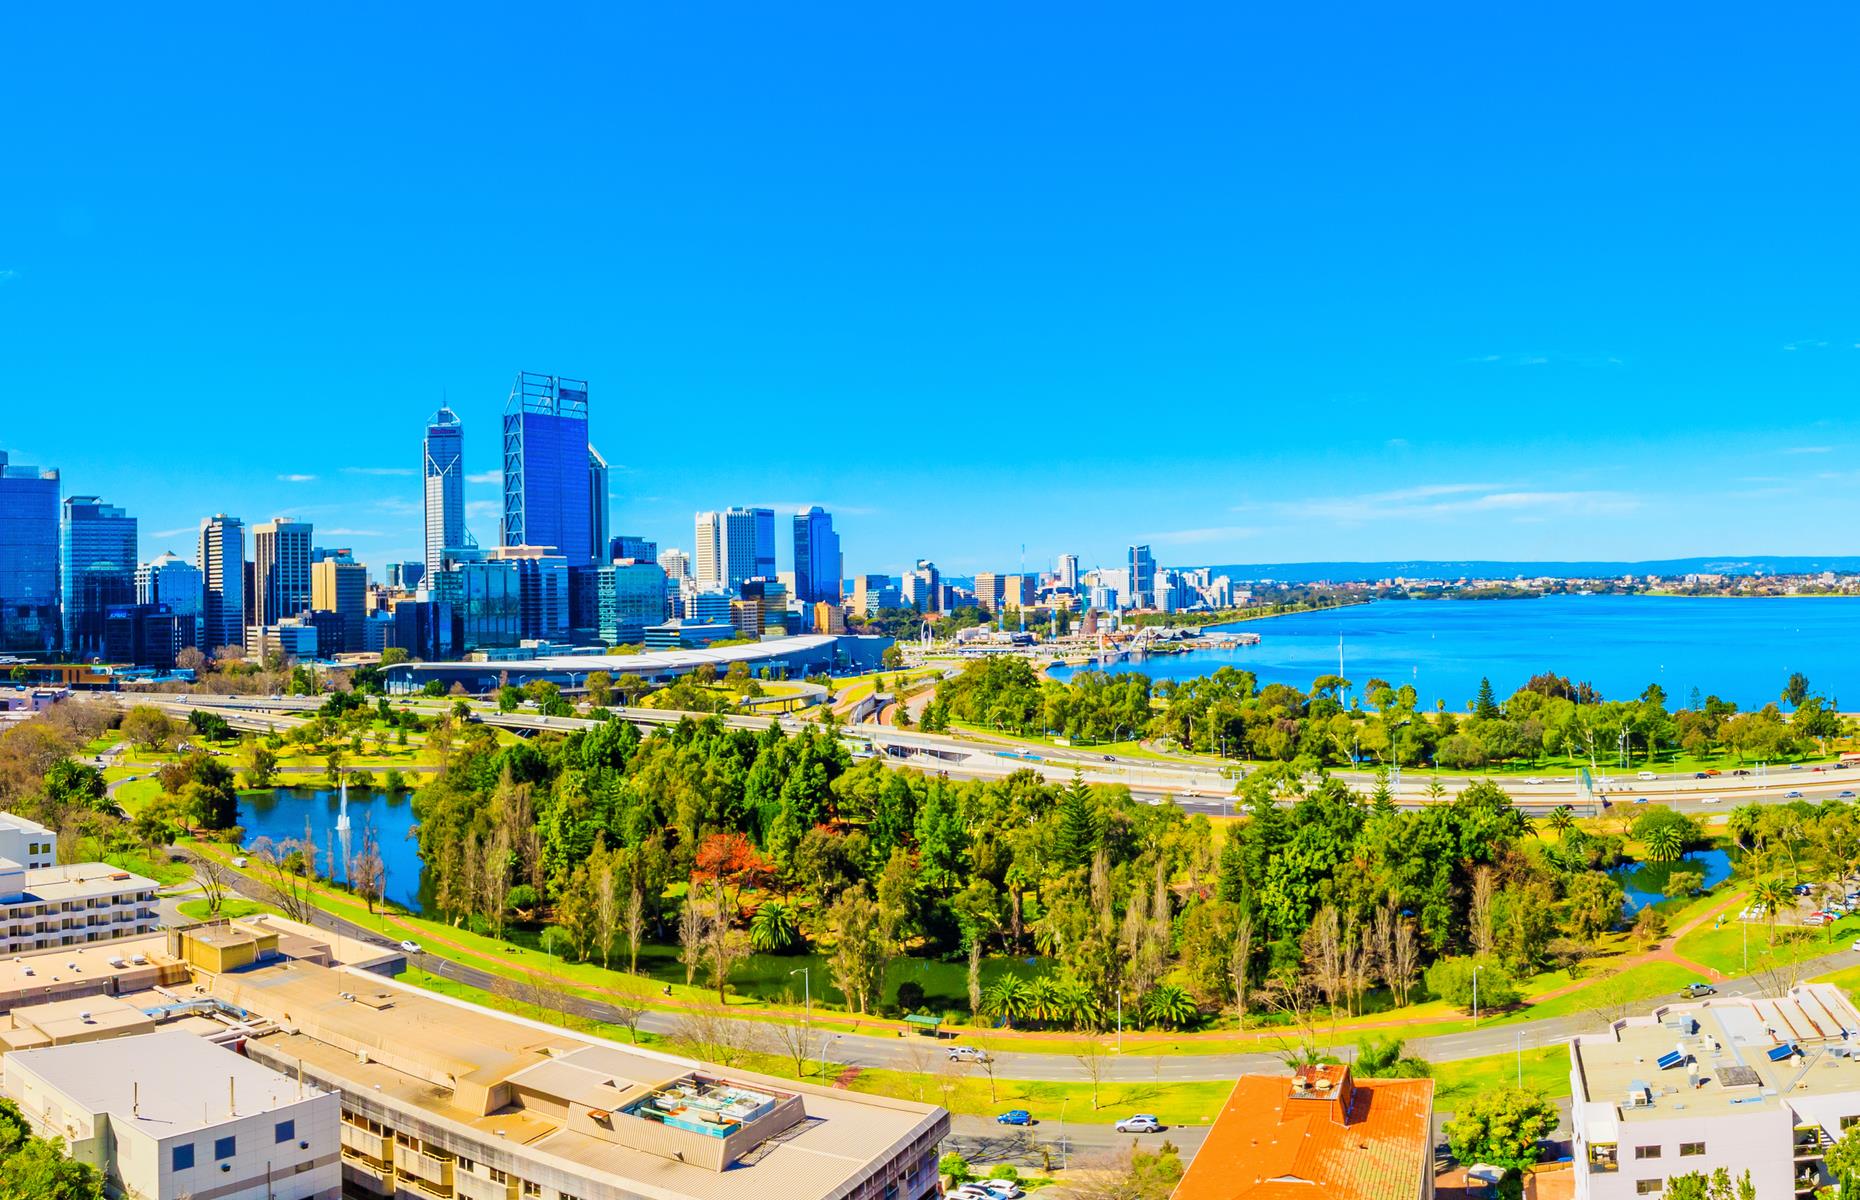 <p>As urban spaces go, <a href="https://www.bgpa.wa.gov.au/kings-park">Kings Park</a> is an impressive one. In fact, it’s one of the largest inner-city parks in the world and boasts stunning views of Perth’s skyline and the Swan River. Two-thirds of the park are bushland. It's also laced with tracks for walkers and joggers, has various play areas and is full of peaceful spots for picnickers and sunbathers. See native flora in the beautiful Western Australian Botanic Garden, gawp at the mighty 750-year old boab tree Gija Jumulu and walk among the treetops on the Lotterywest Federation Walkway.</p>  <p><a href="https://www.loveexploring.com/galleries/162988/the-fascinating-stories-behind-australias-world-heritage-sites?page=1"><strong>The fascinating stories behind Australia's World Heritage Sites</strong></a></p>